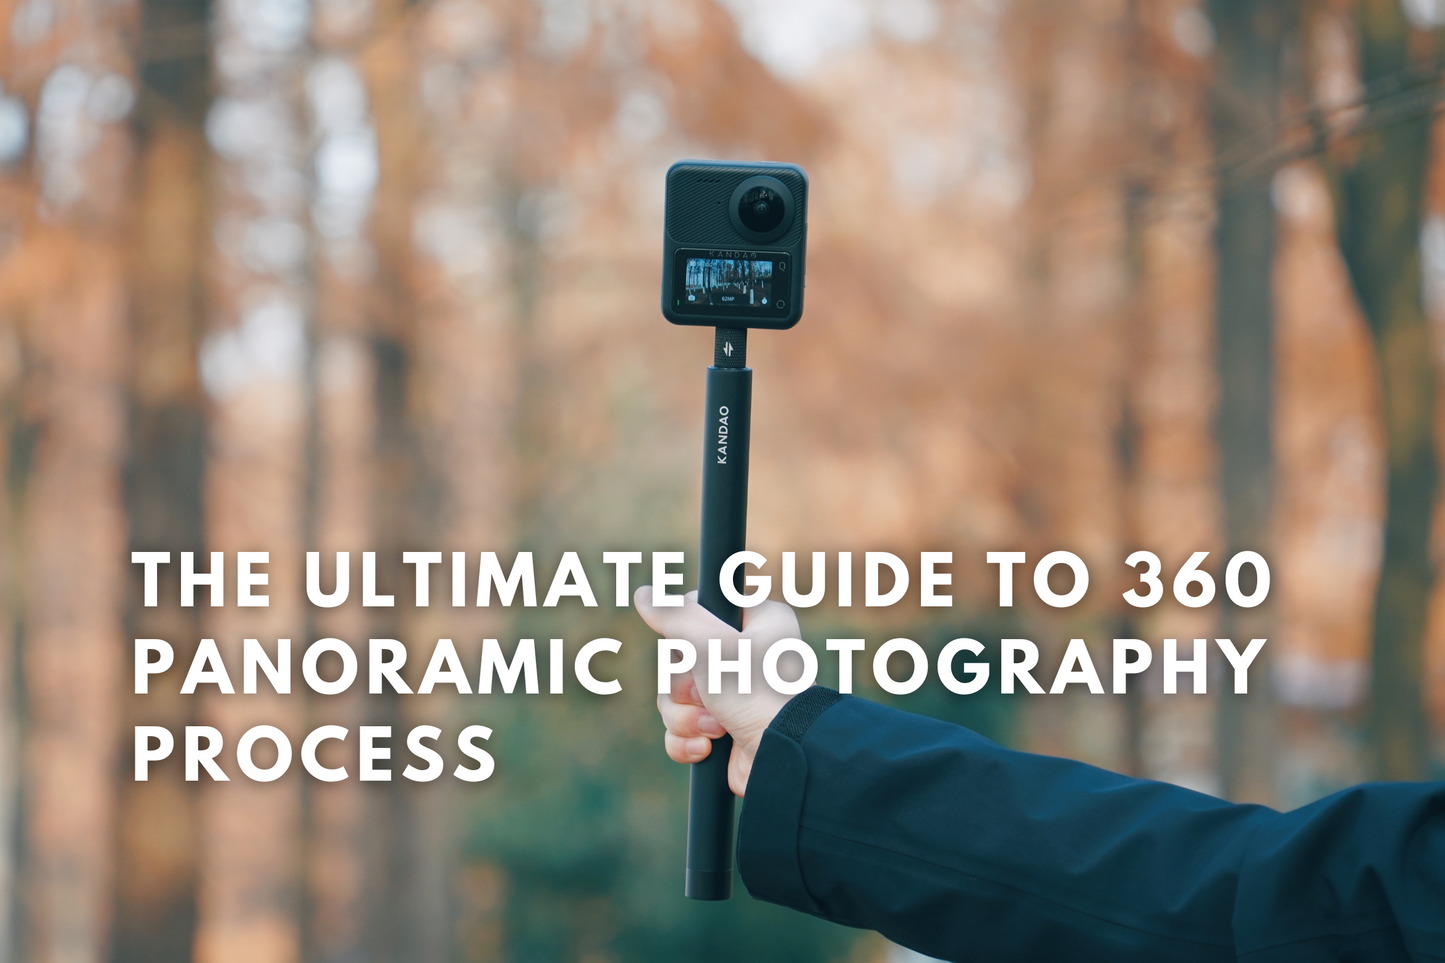 The Ultimate Guide to 360 Panoramic Photography Process